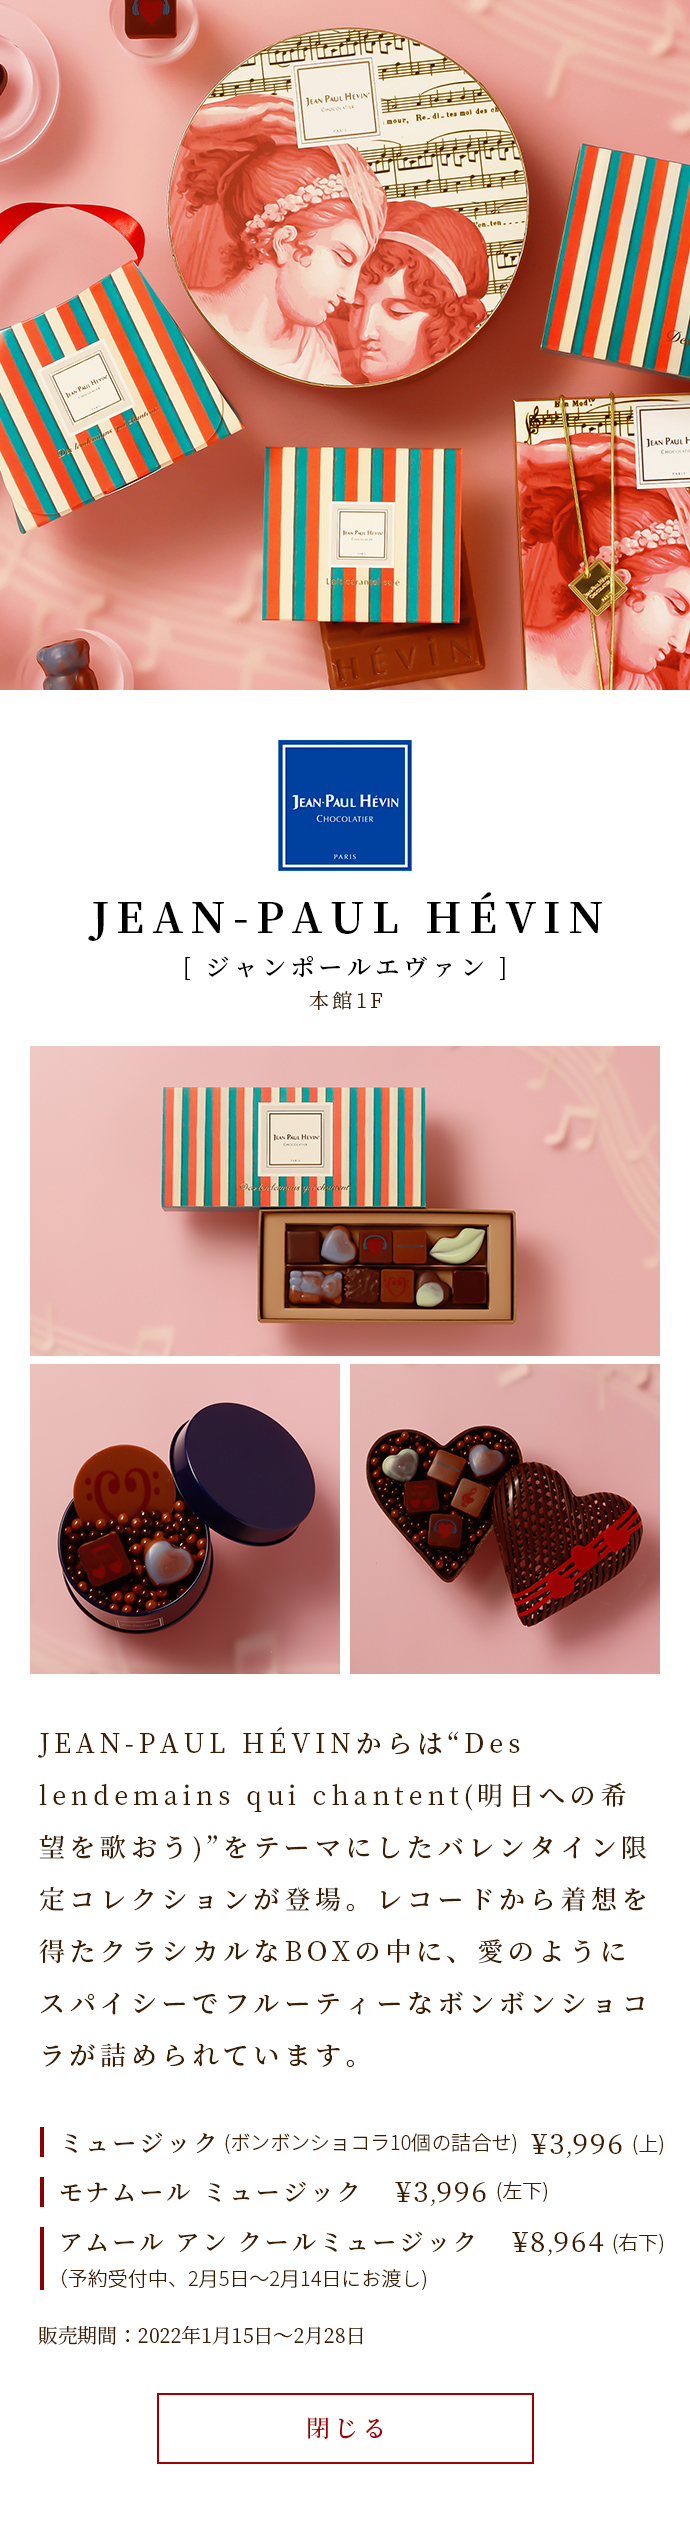 From JEAN-PAUL HÉVIN, a Valentine's limited collection with the theme of "Des lendemains qui chantent" has appeared. In a classical BOX inspired by records, spicy and fruity bonbon chocolate like love is packed. Music (Assortment of 10 Bonbon Chocolats) ￥ 3,996 Monamour Music ￥ 3,996 Amur Uncool Music ￥ 8,964 (Reservations accepted, handed over from February 5th to February 14th) Sale period: January 15th to 2nd, 2022 28th of March